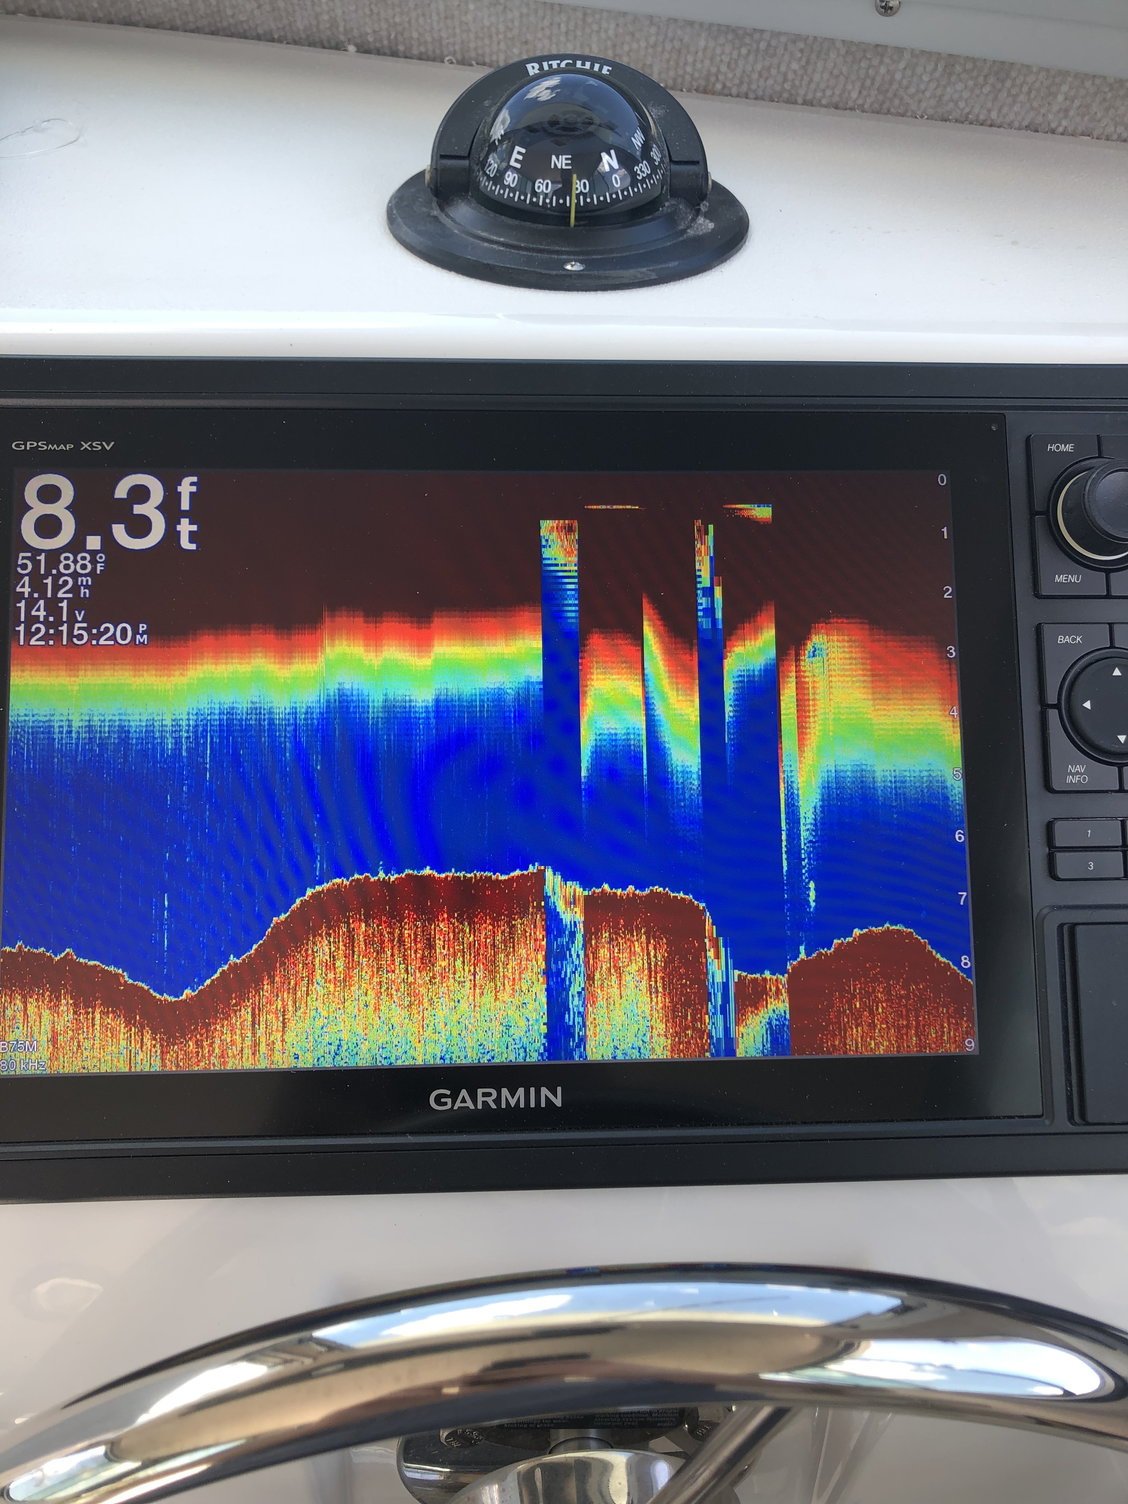 Help with garmin GPSmap 1242 xsv settings - The Hull Truth - Boating and  Fishing Forum